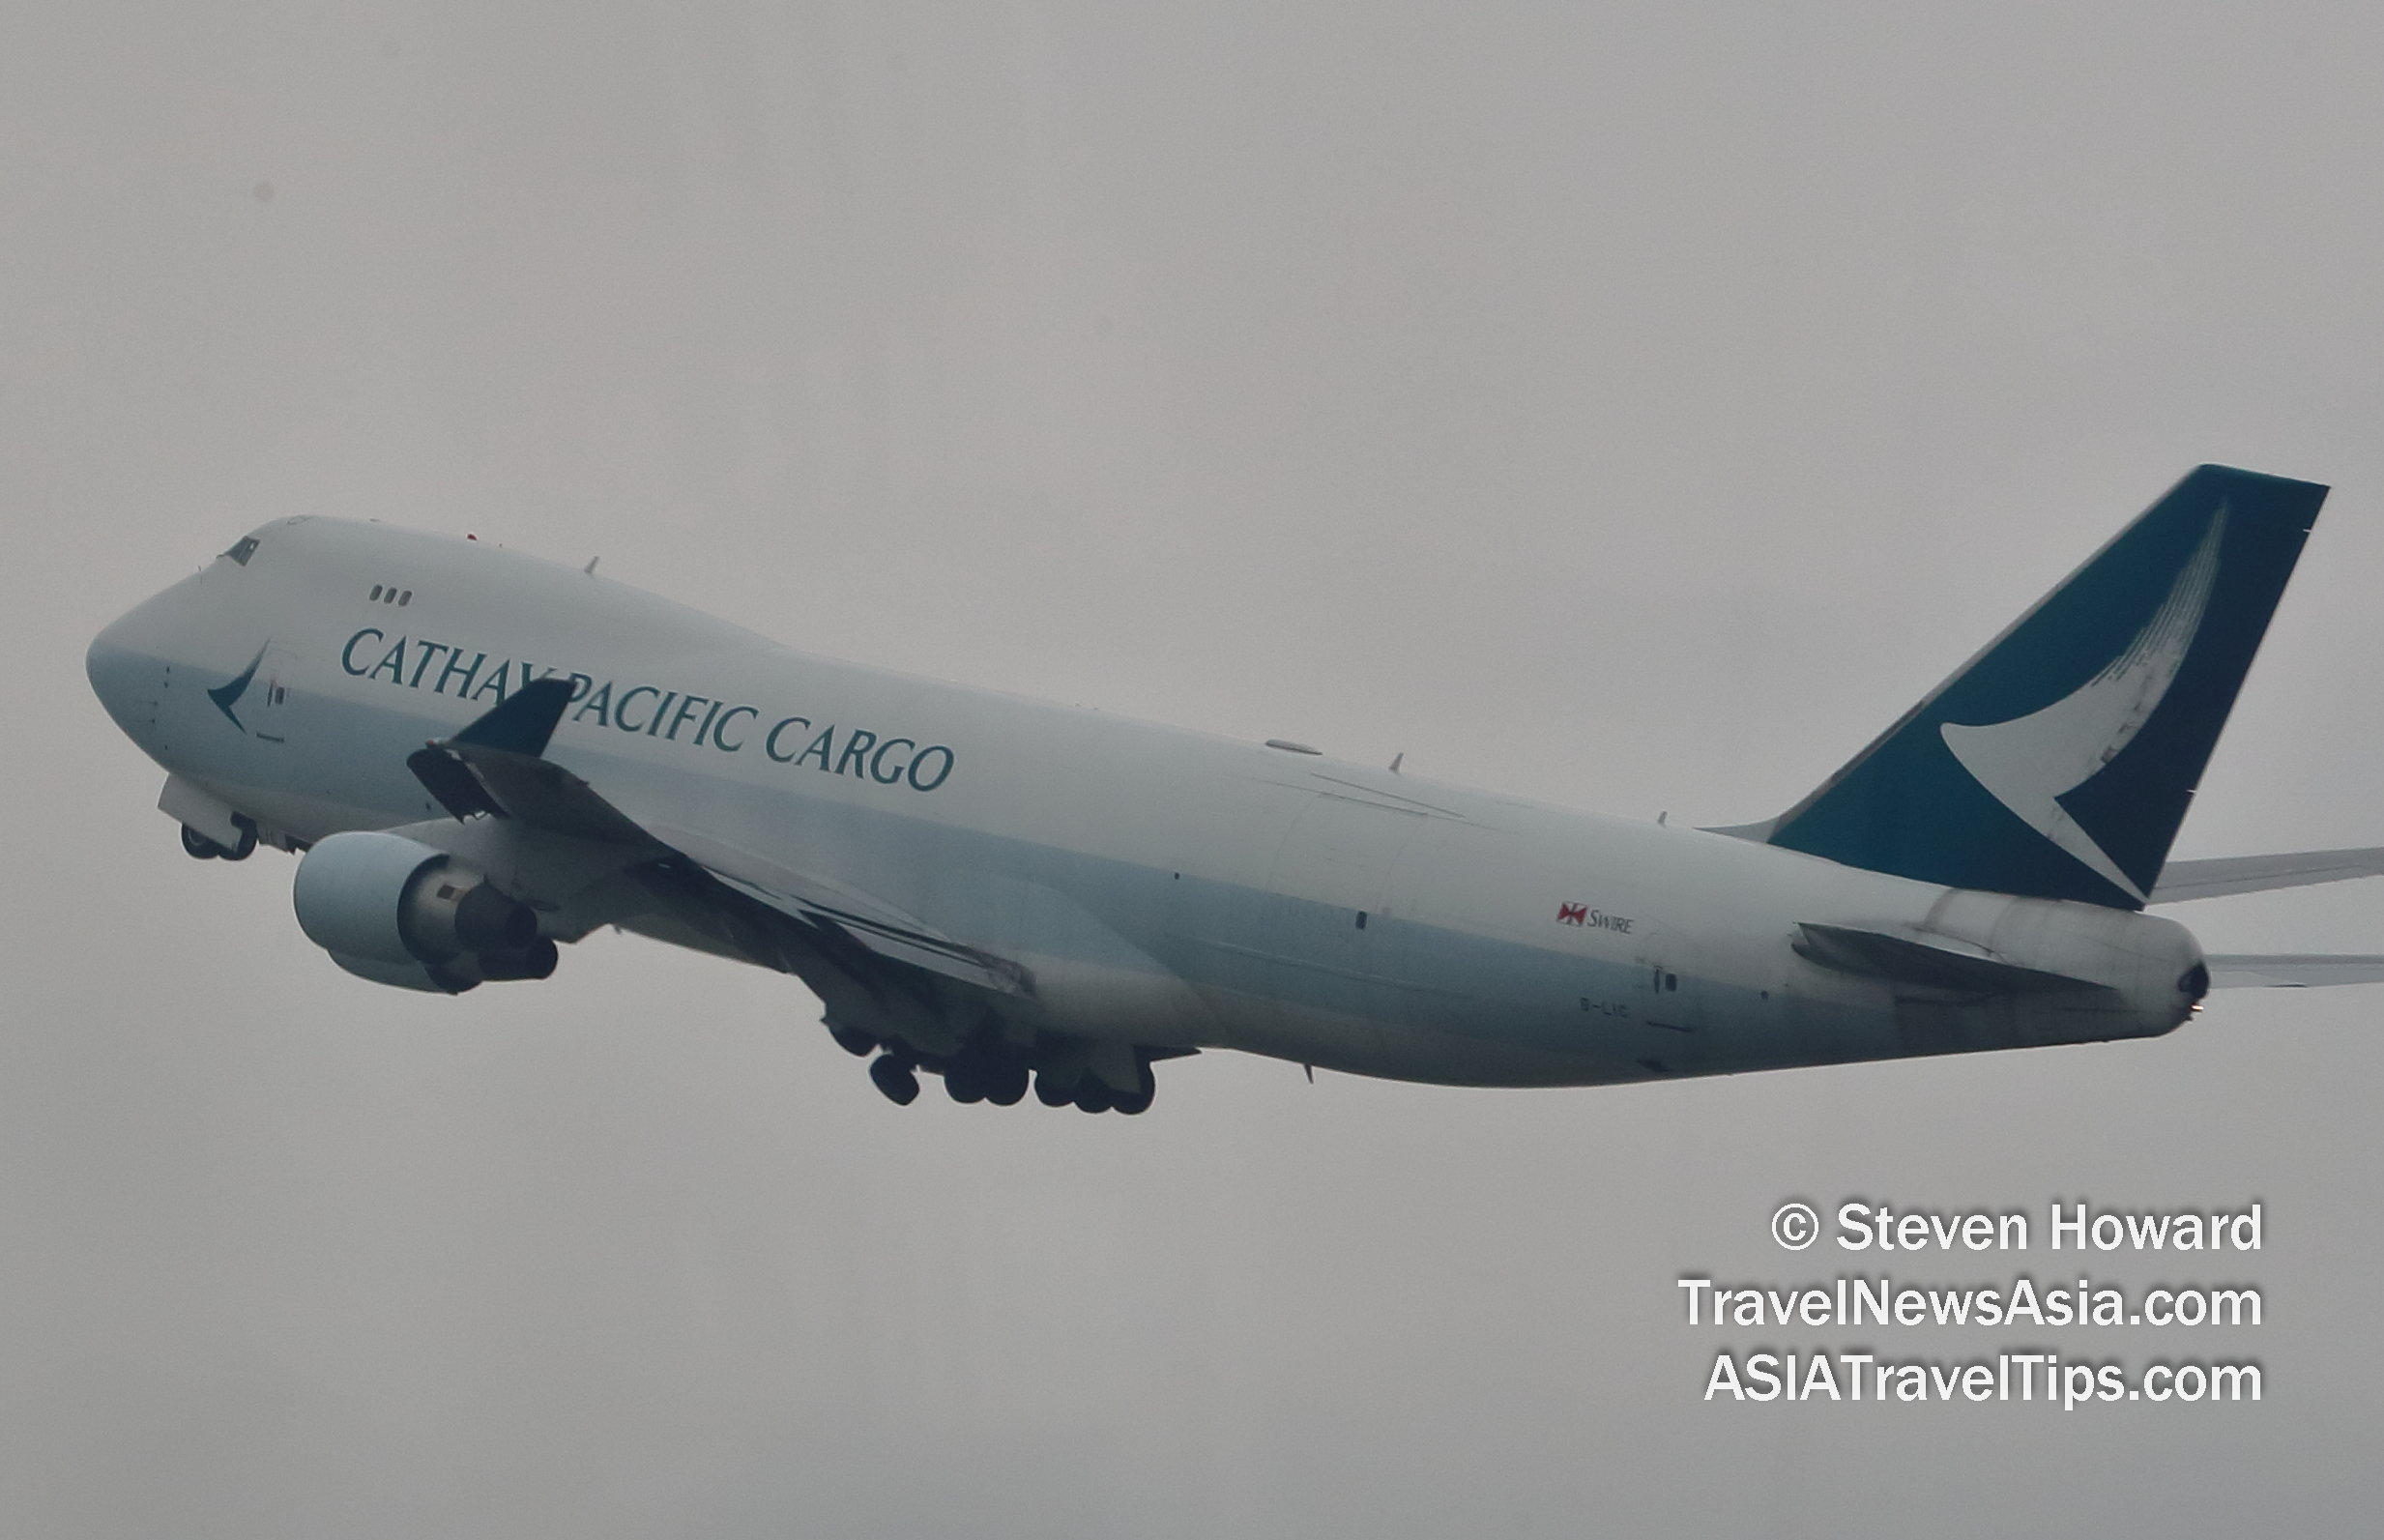 Cathay Pacific Boeing 747-400F reg: B-LIC having just taken off from Hong Kong International Airport in April 2019. Picture by Steven Howard of TravelNewsAsia.com Click to enlarge.